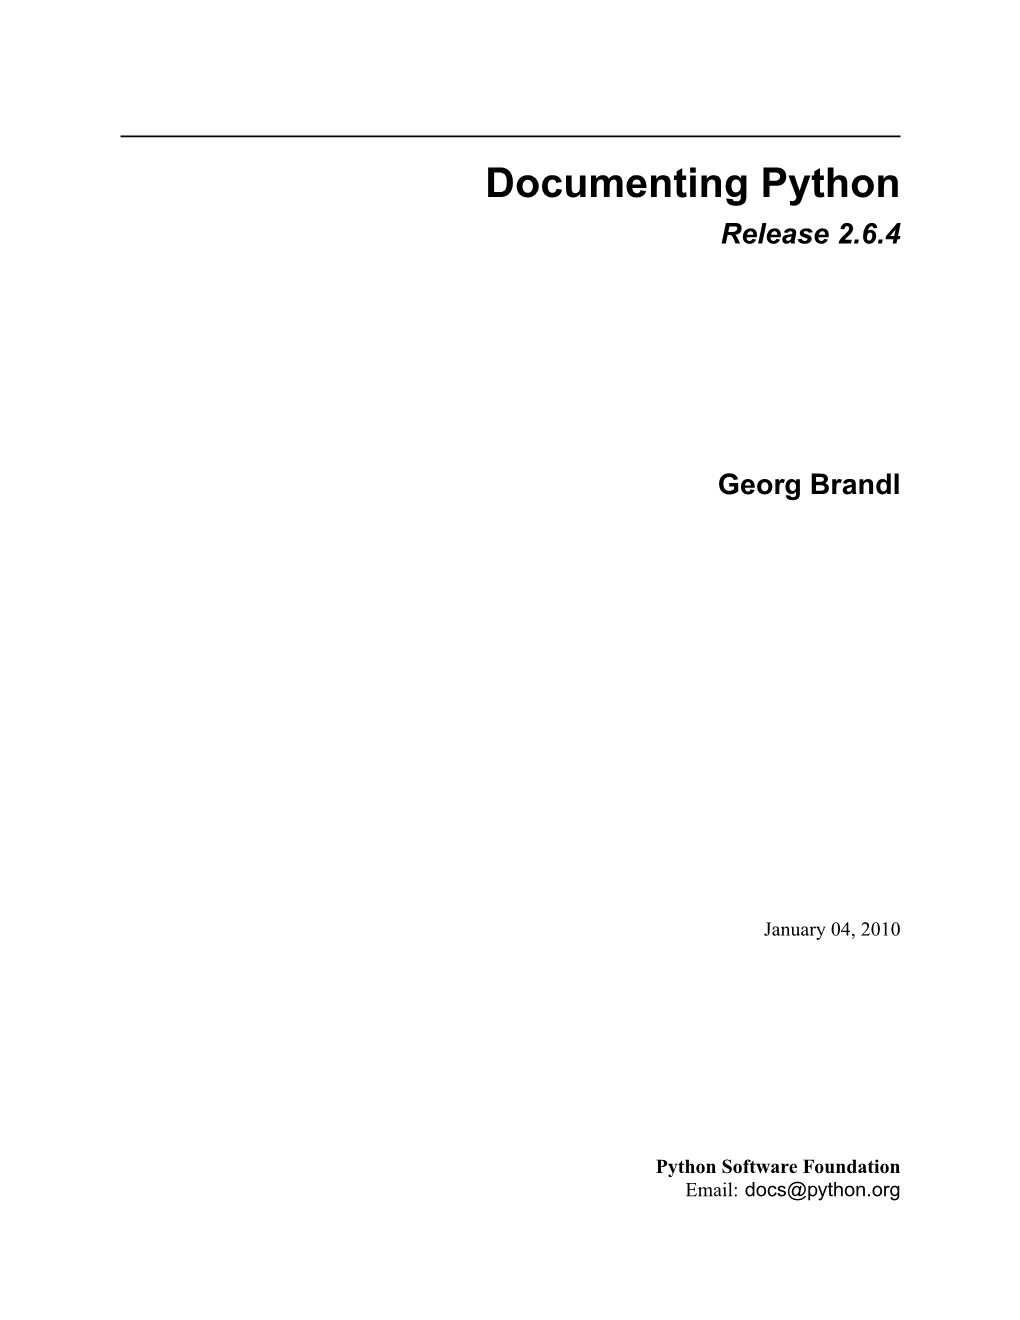 Documenting Python Release 2.6.4